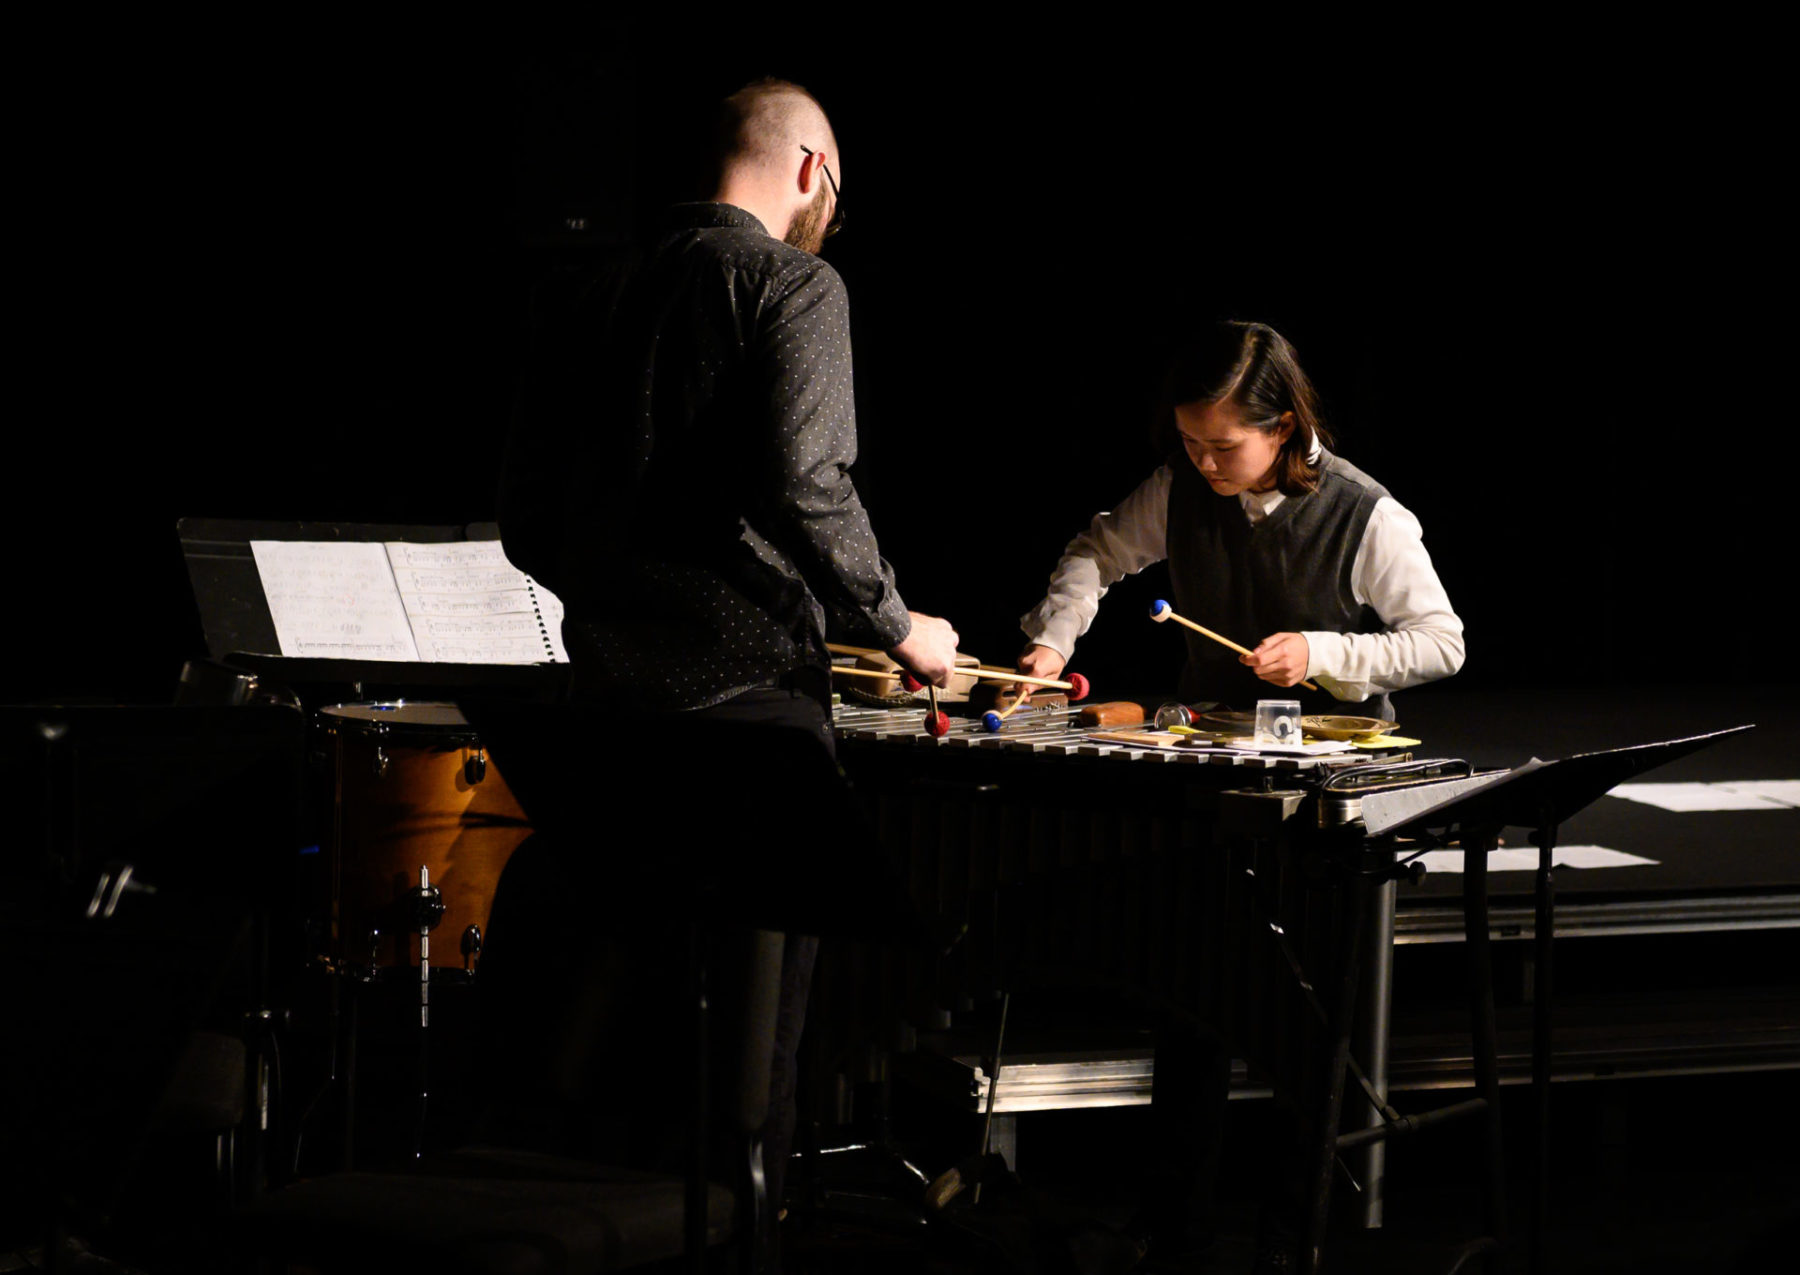 Aaron Graham & Julia Chien at Still Life with Avalanche, Modulus Festival 2019